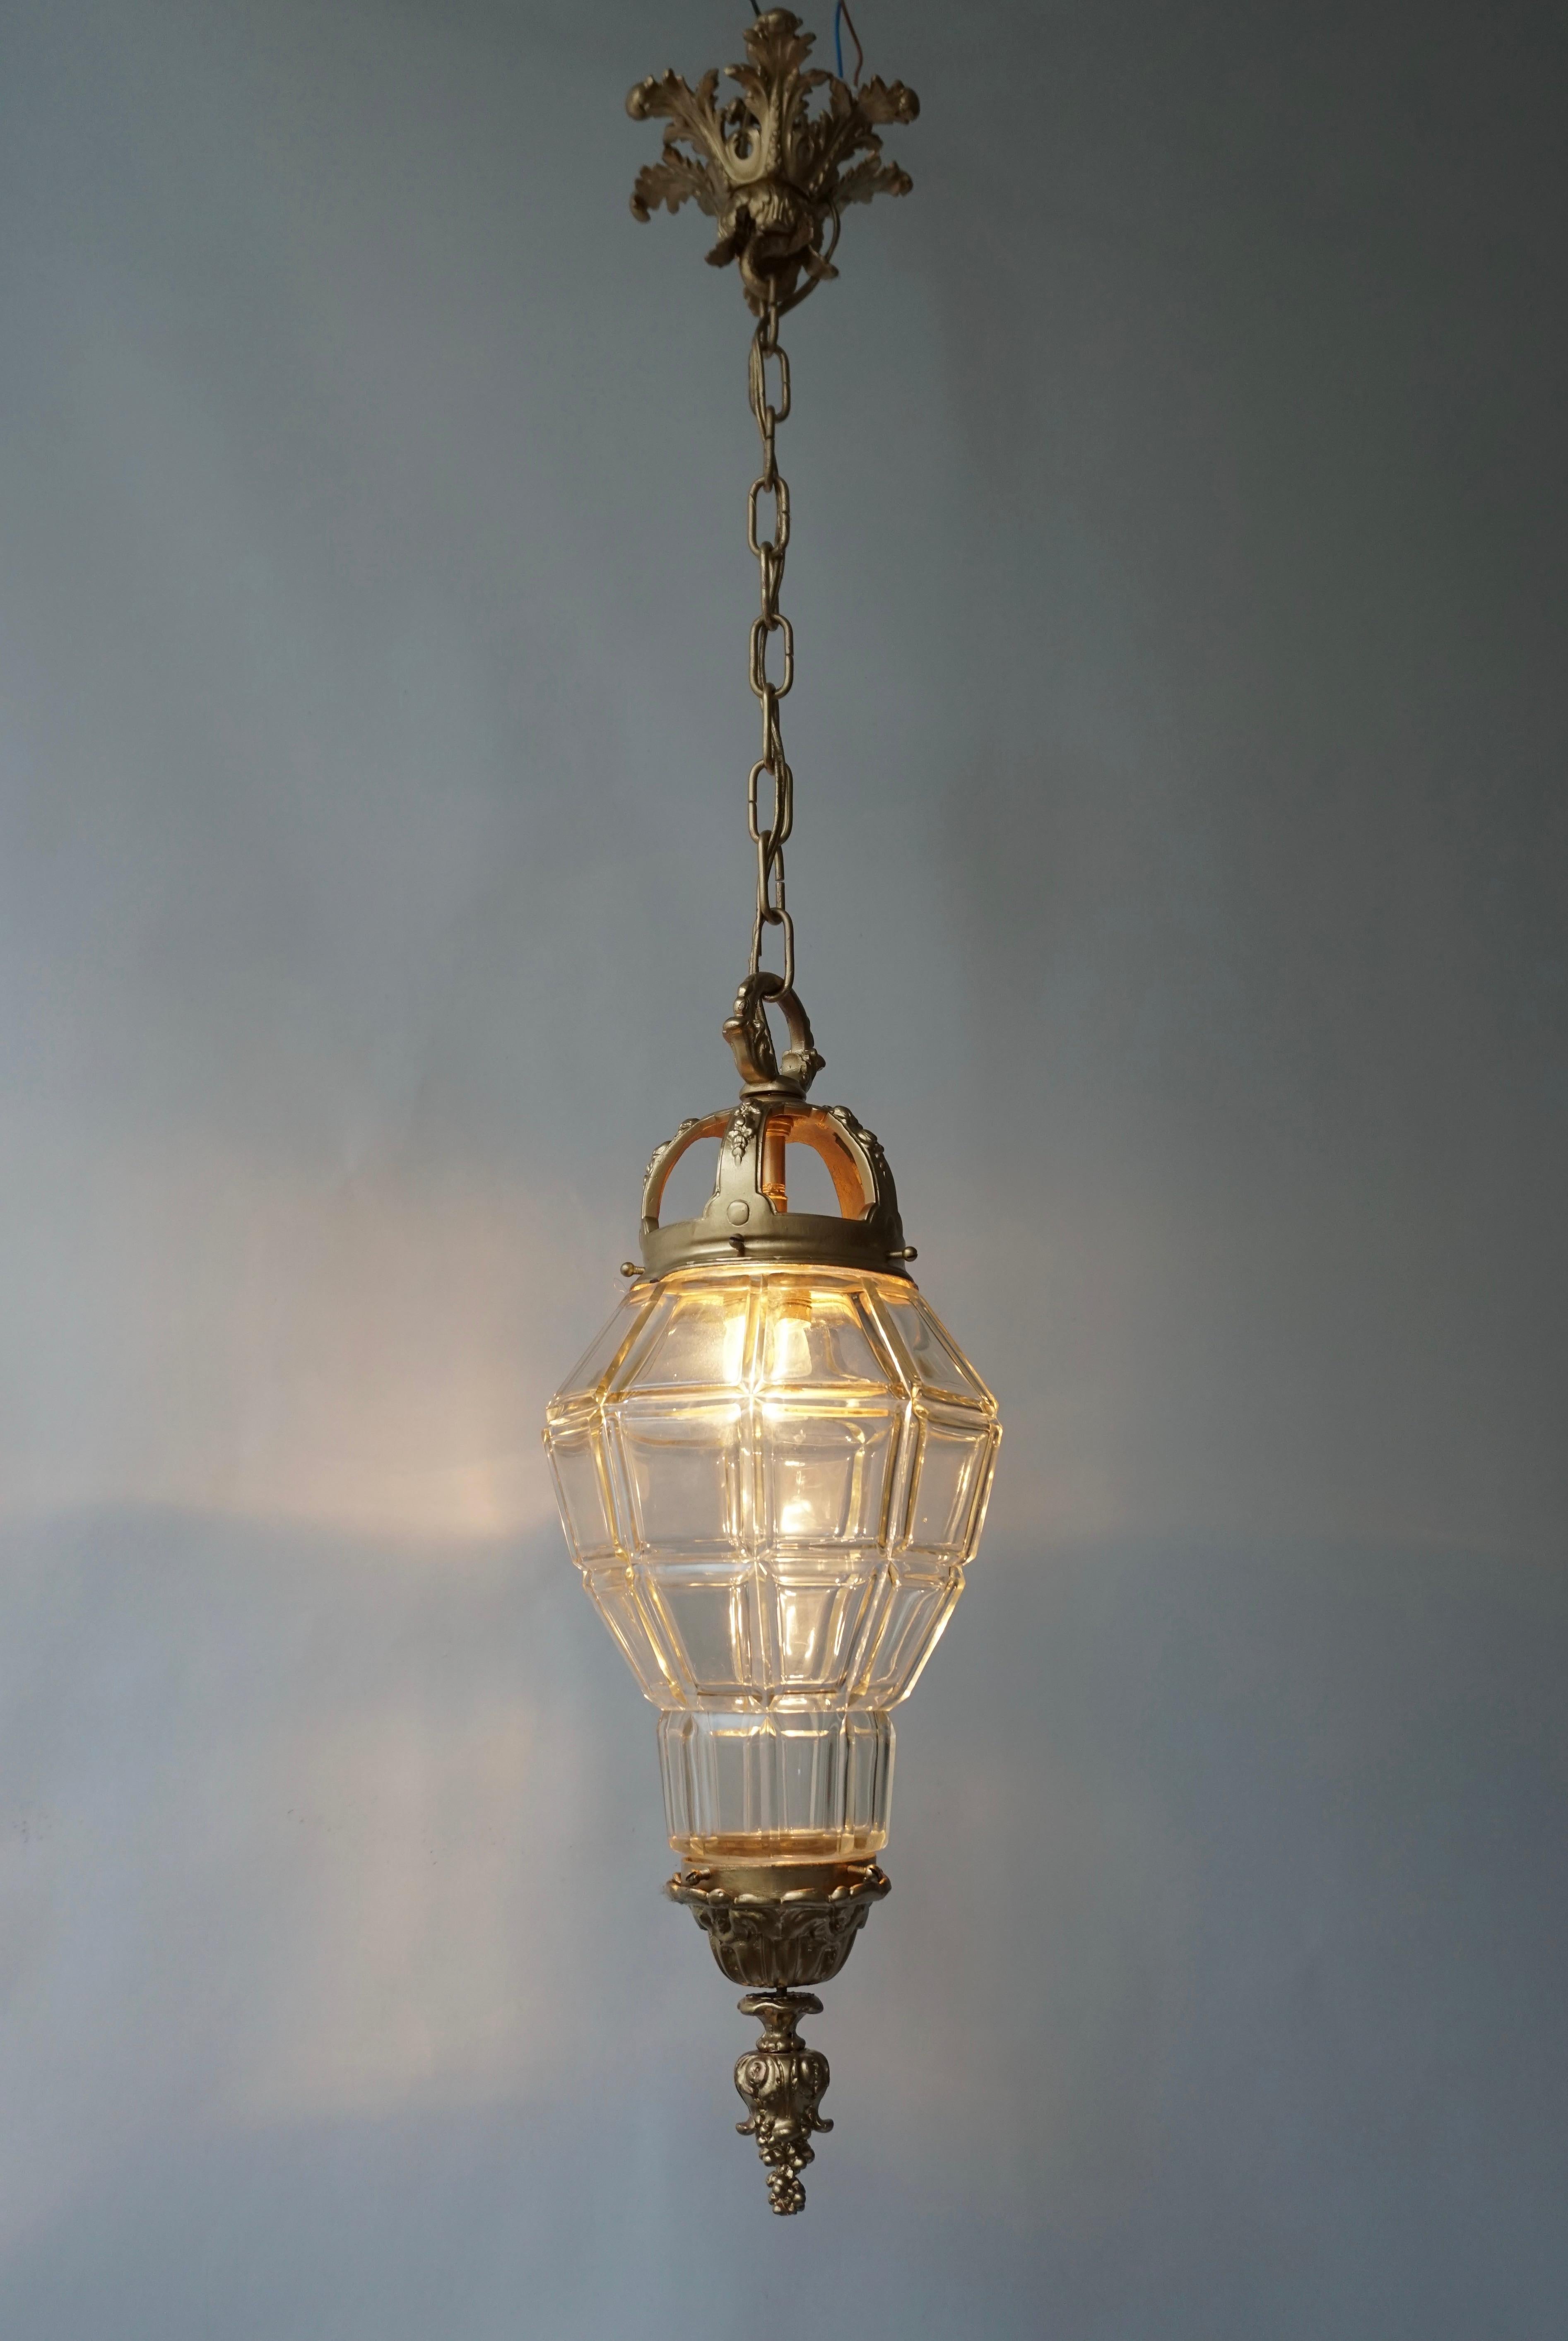 Bronze and crystal lantern.
Measures: Diameter 22 cm.
Height fixture 55 cm.
Total height including the chain and canopy 105 cm.
Weight 5 kg.